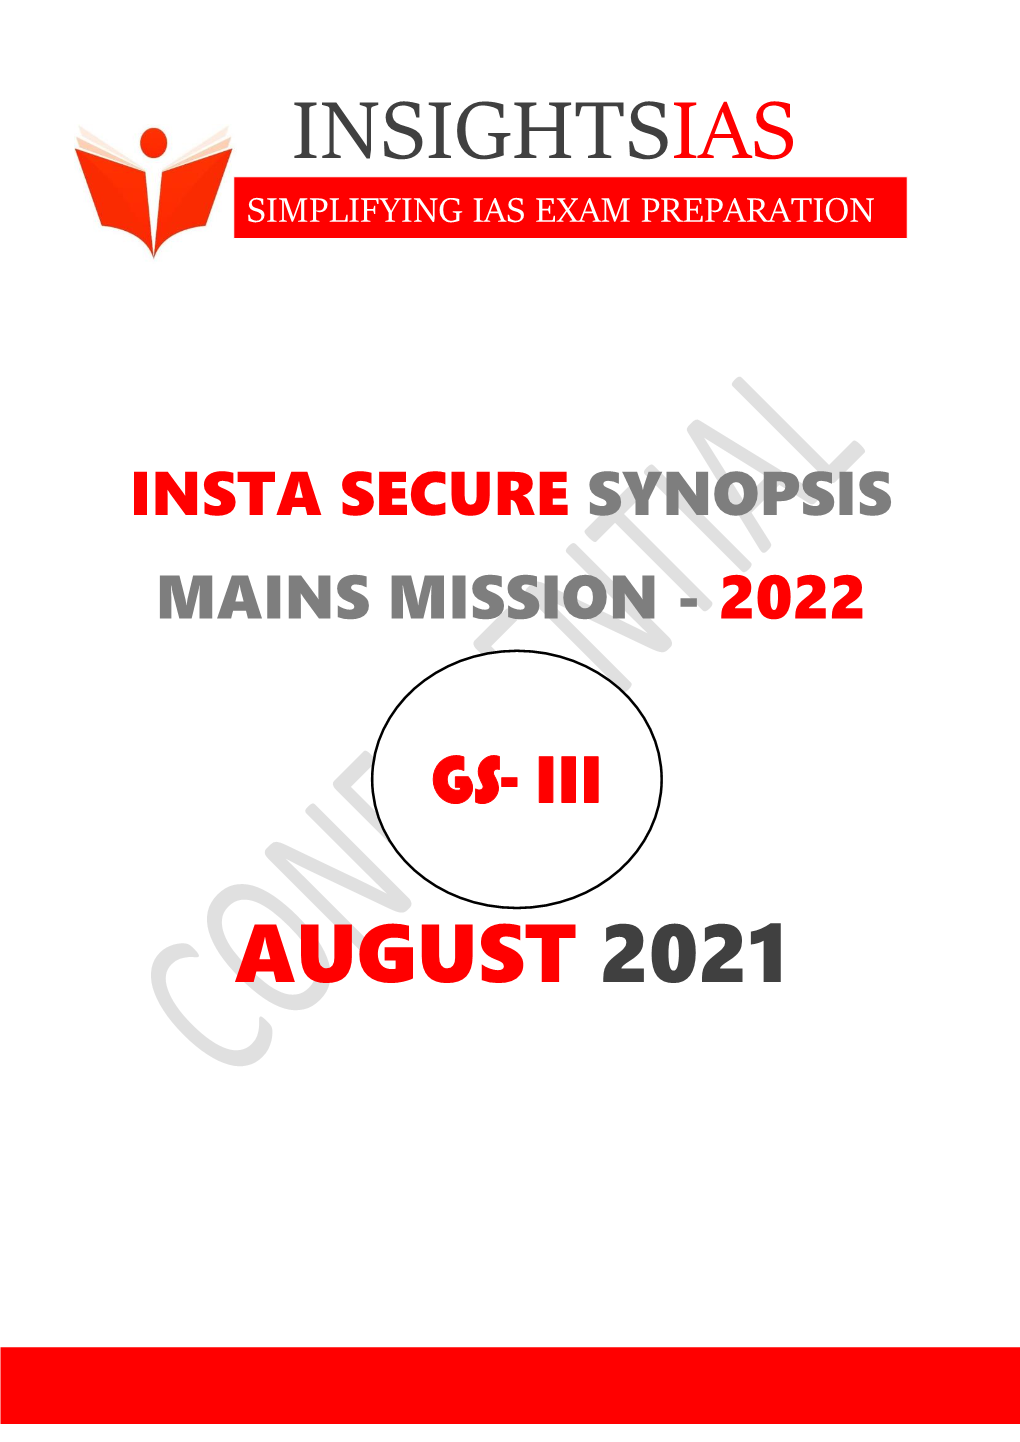 Insta Secure Synopsis Mains Mission - 2022